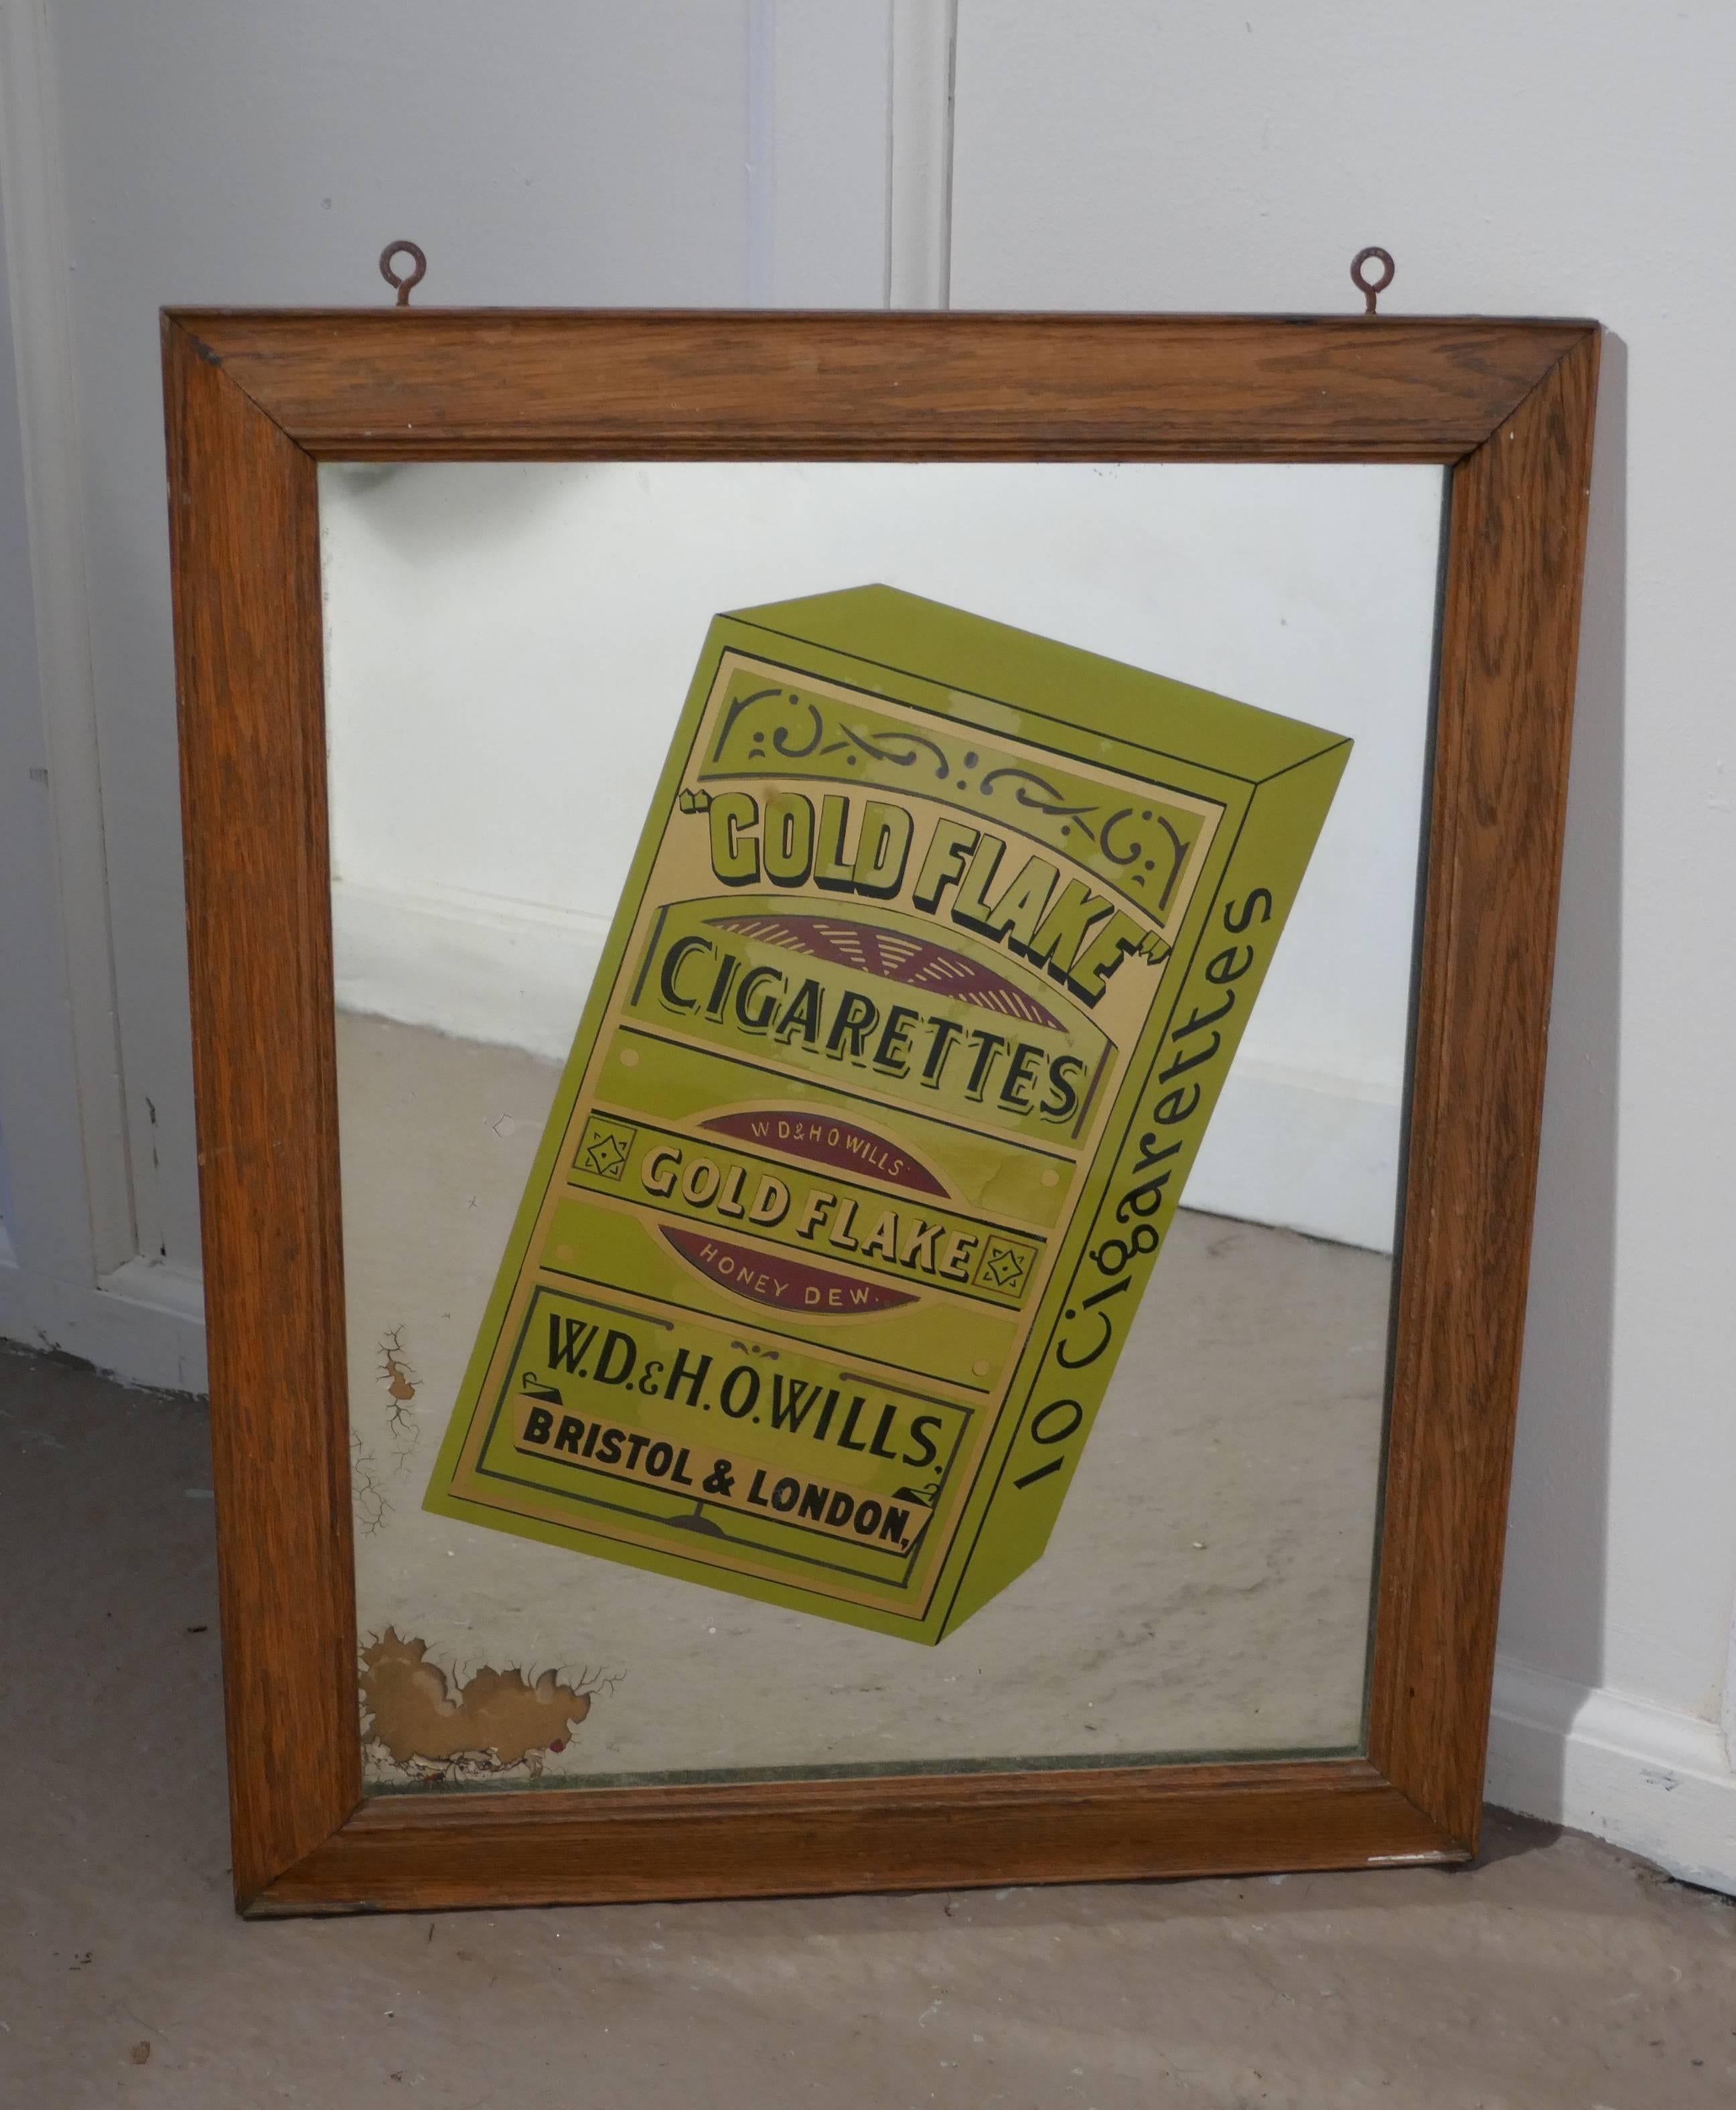 Wills Gold Flake cigarettes advertising mirror

Very rare old mirror, a bold picture of the Gold Flake packet set in an golden oak frame
The main body of the mirror is in good general condition sadly there is a patch in one corner where the